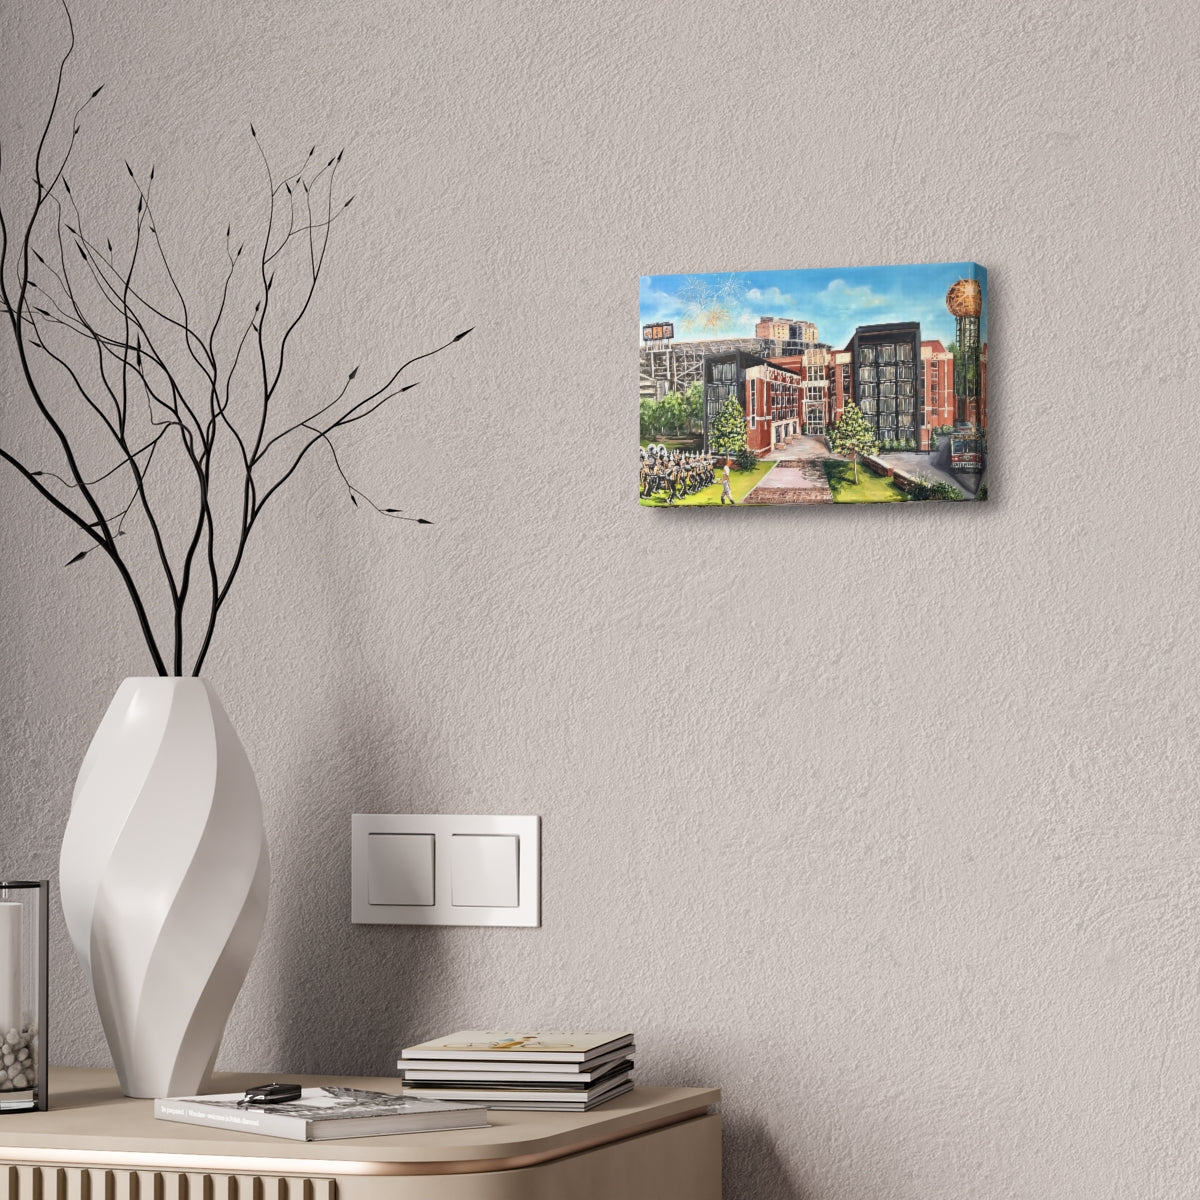 Zeanah Engineering Complex - Stretched Canvas Print